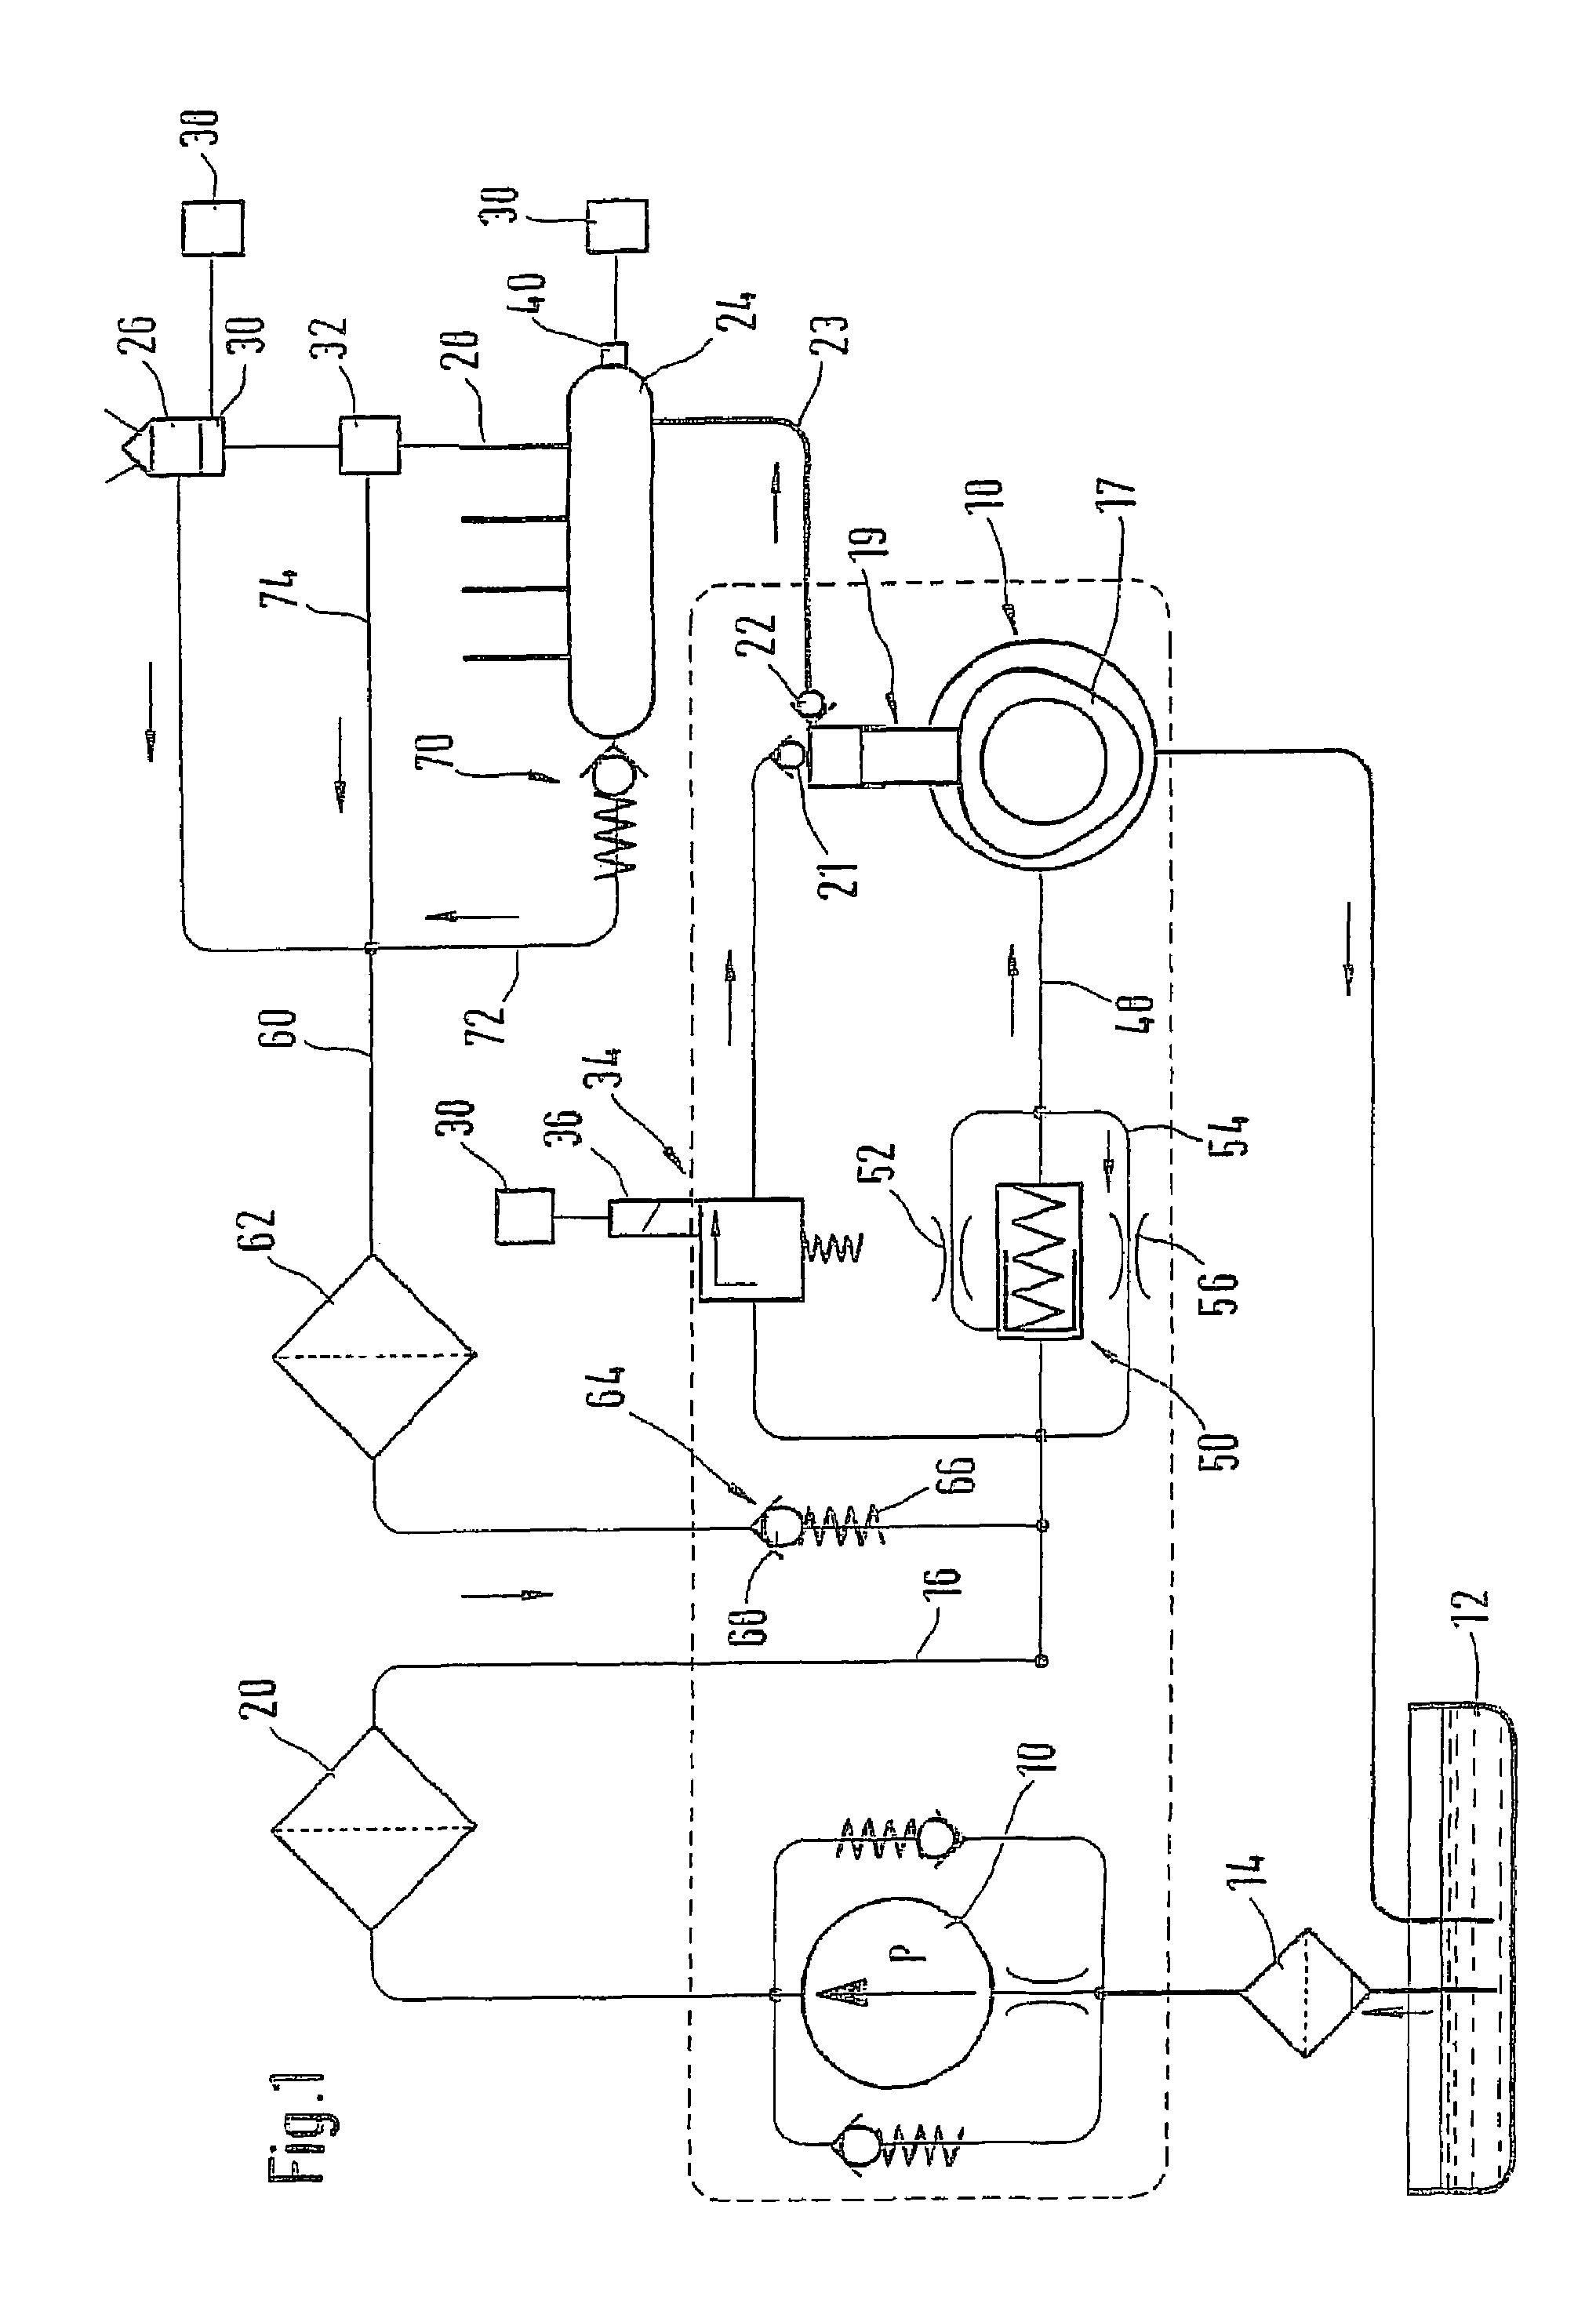 Fuel injection device for a combustion engine